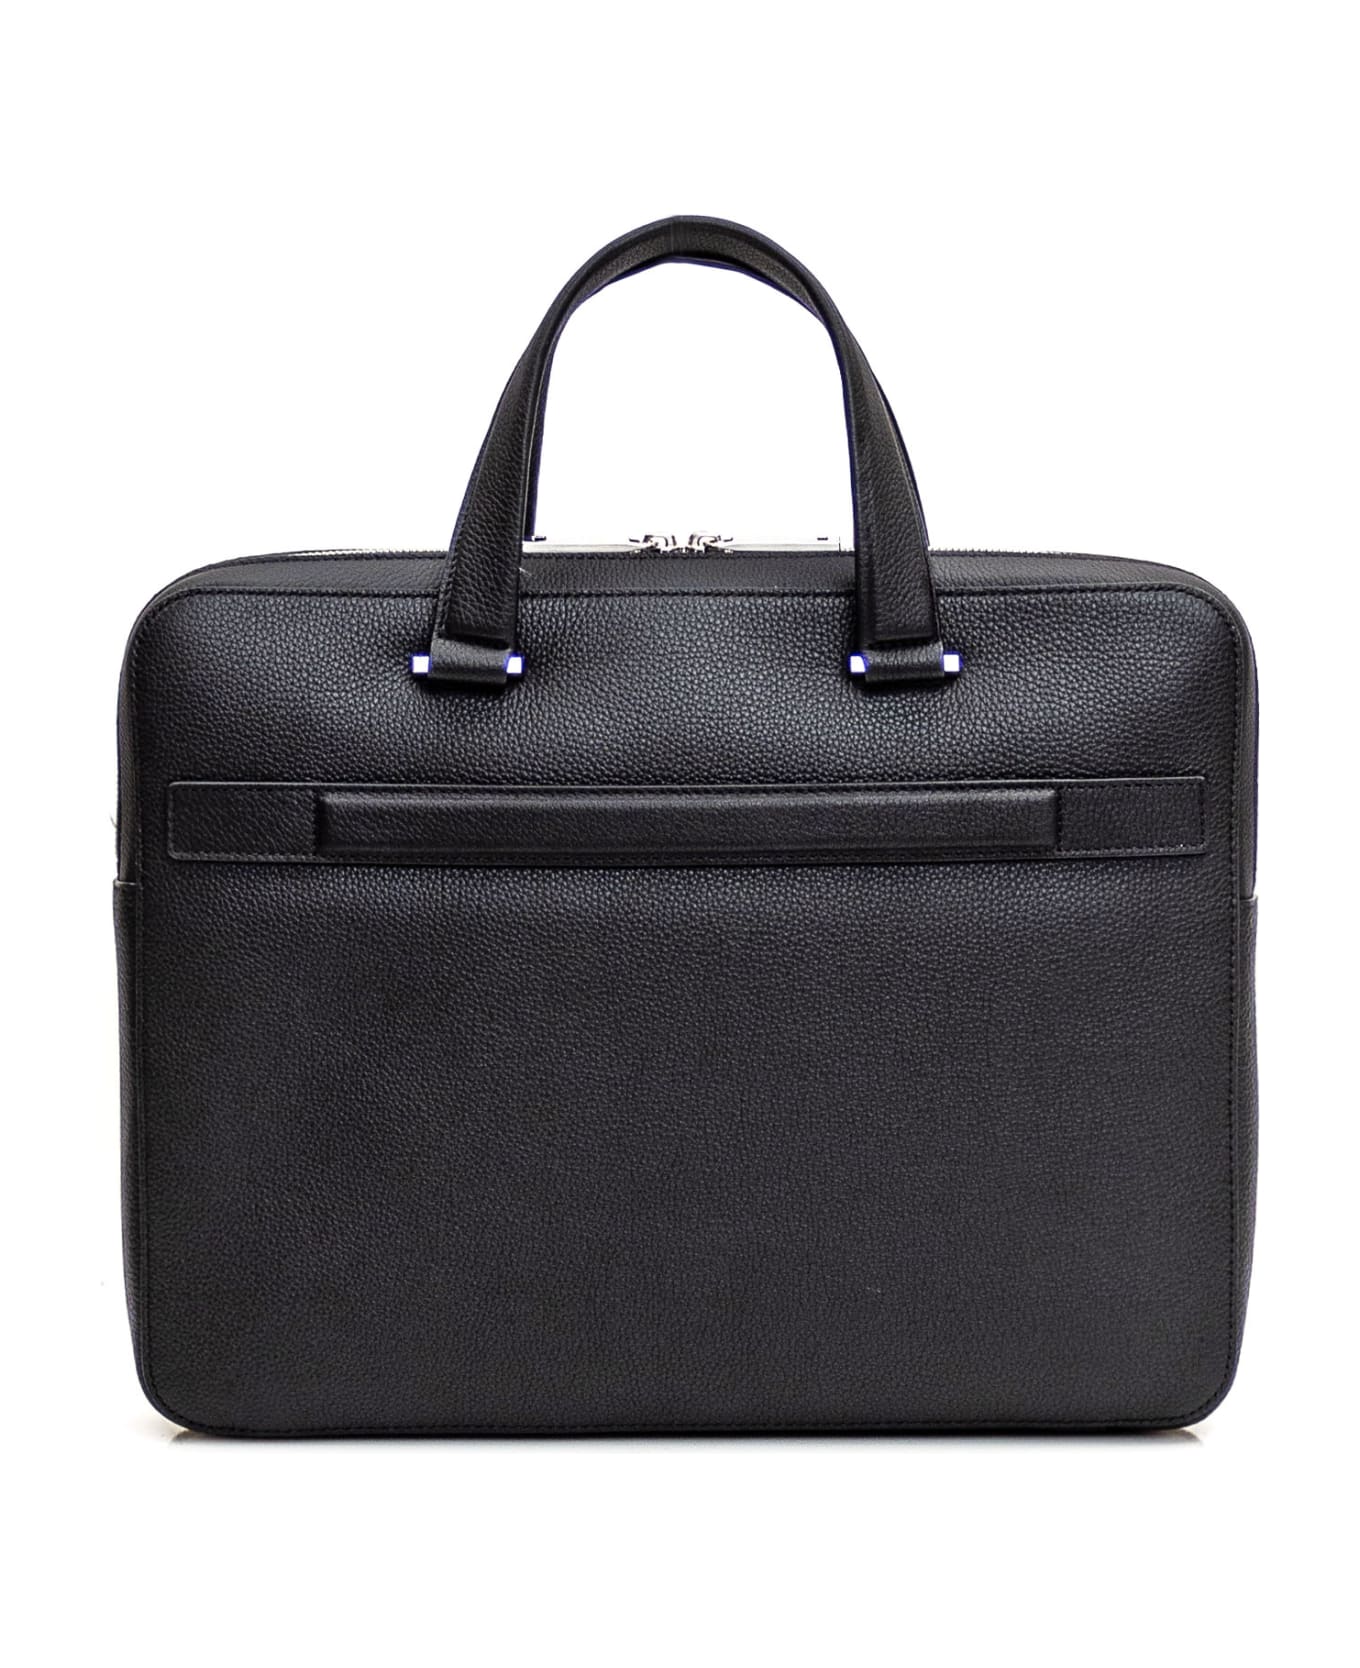 Ferragamo Business Bag With Embossing Material - NERO トラベルバッグ